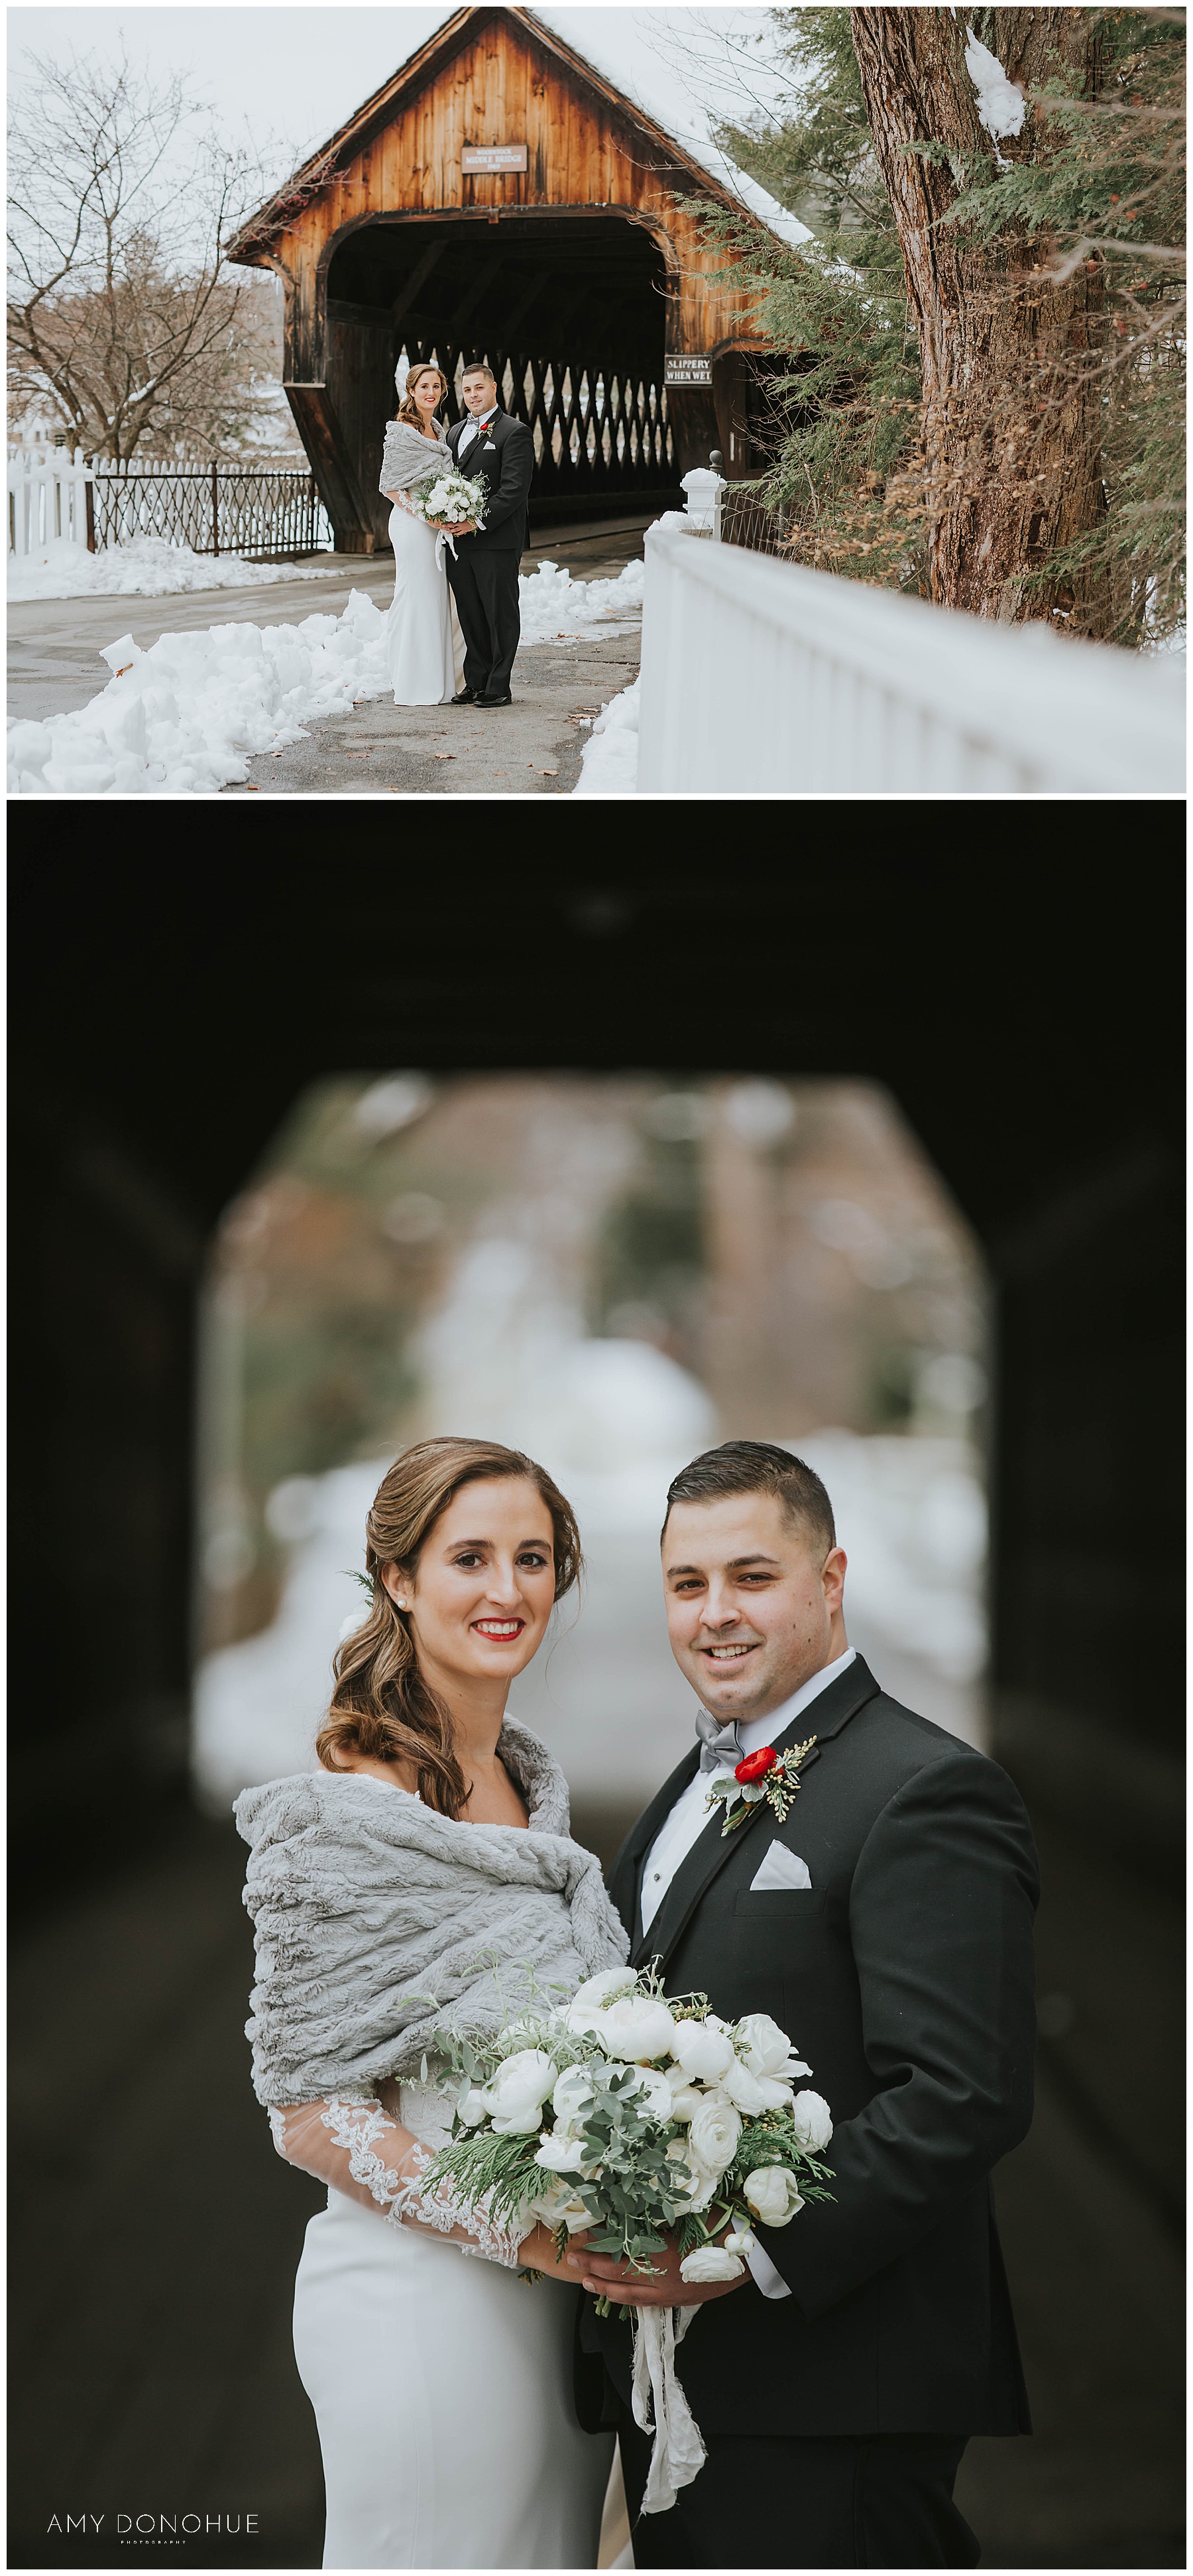 Authentic Bride and Groom Portraits in front of the Covered Bridge | Woodstock Inn & Resort | VT Wedding Photographer | © Amy Donohue Photography